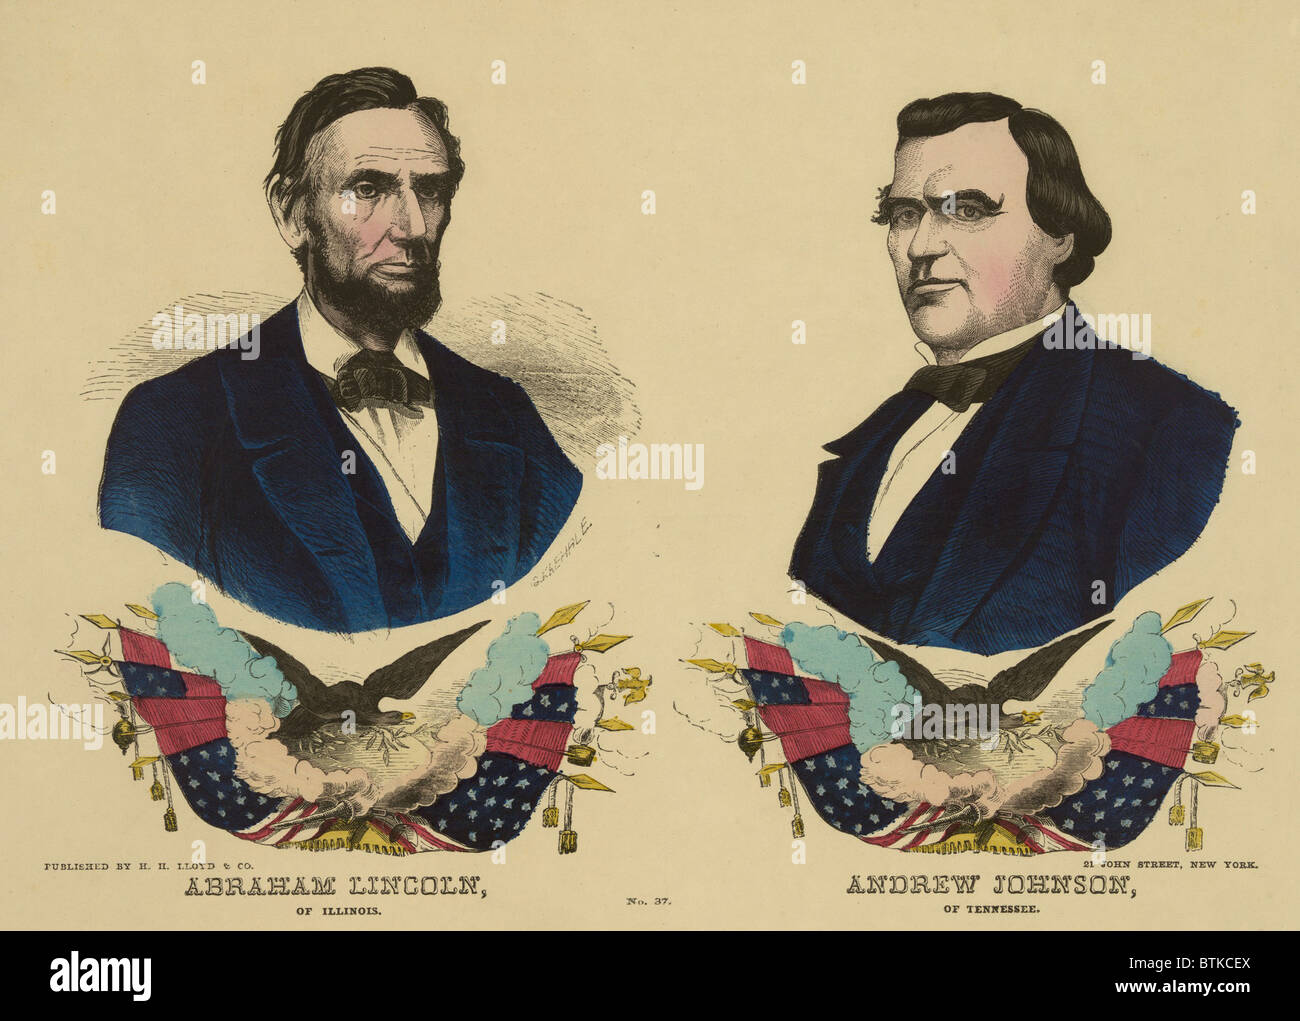 Campaign banner for the Republican ticket in the 1864 presidential election, Abraham Lincoln of Illinois and Andrew Johnson of Tennessee. 1864. Stock Photo